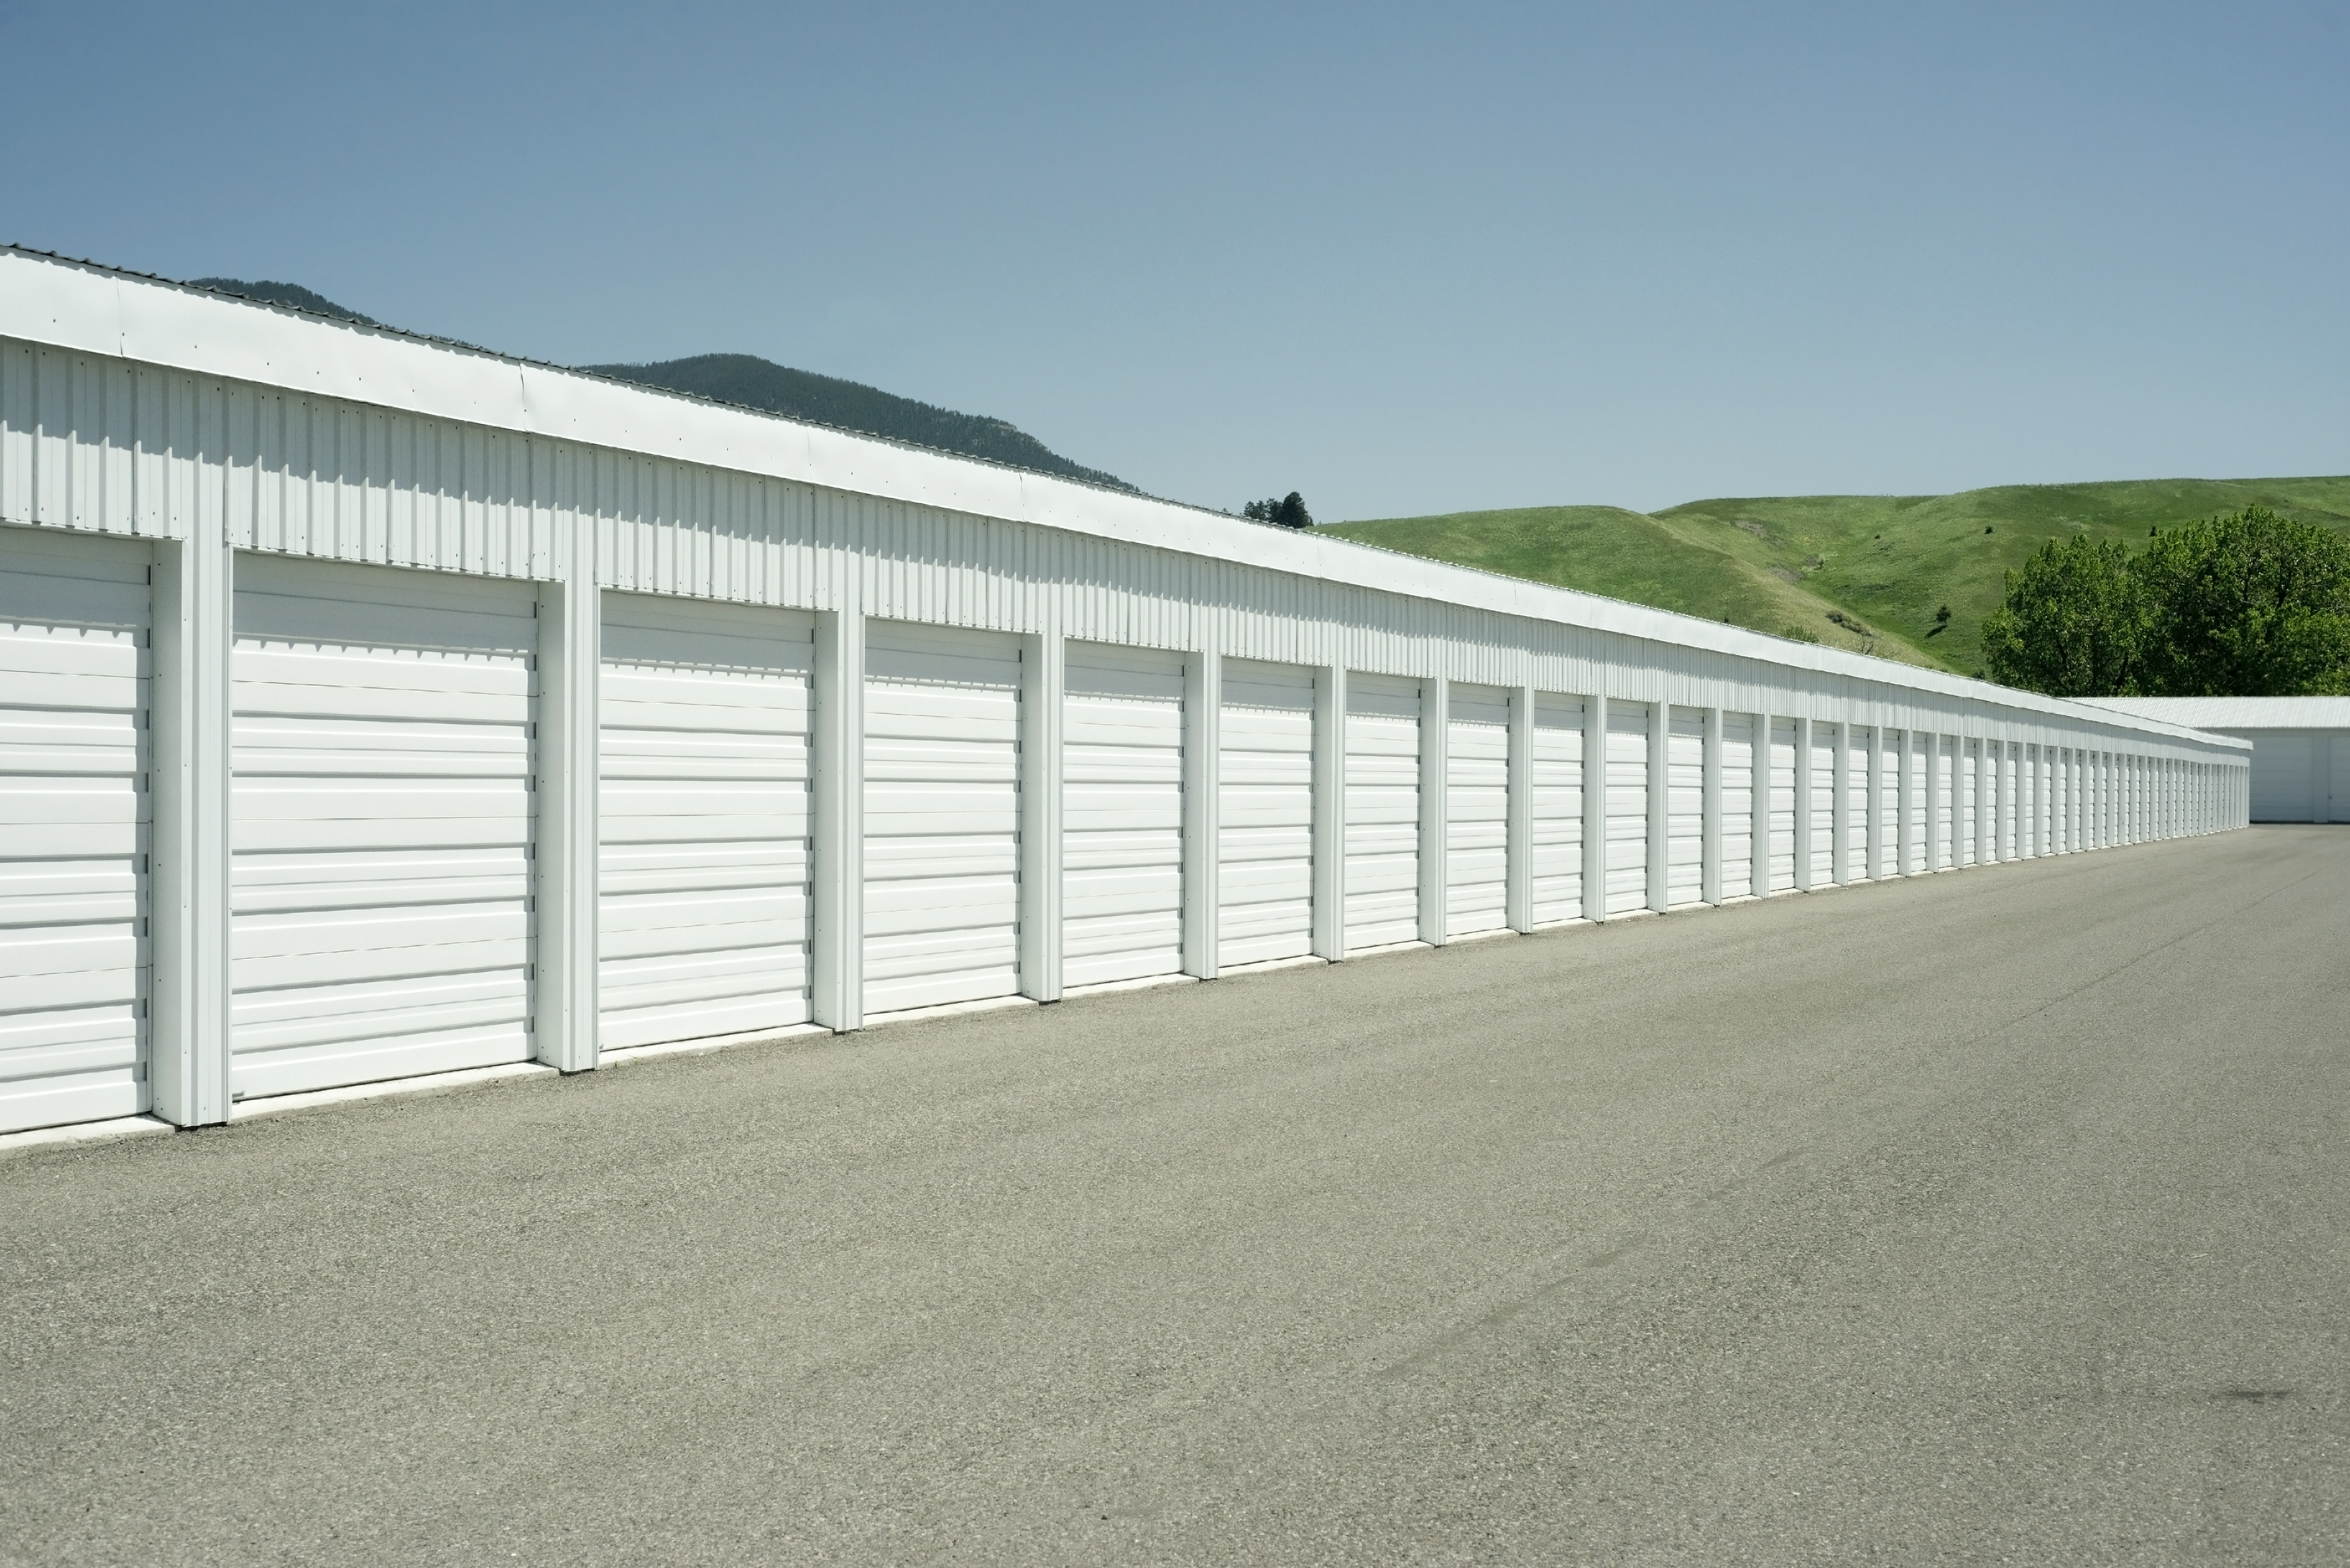 Tips on Finding the Best Storage Facility in York, PA